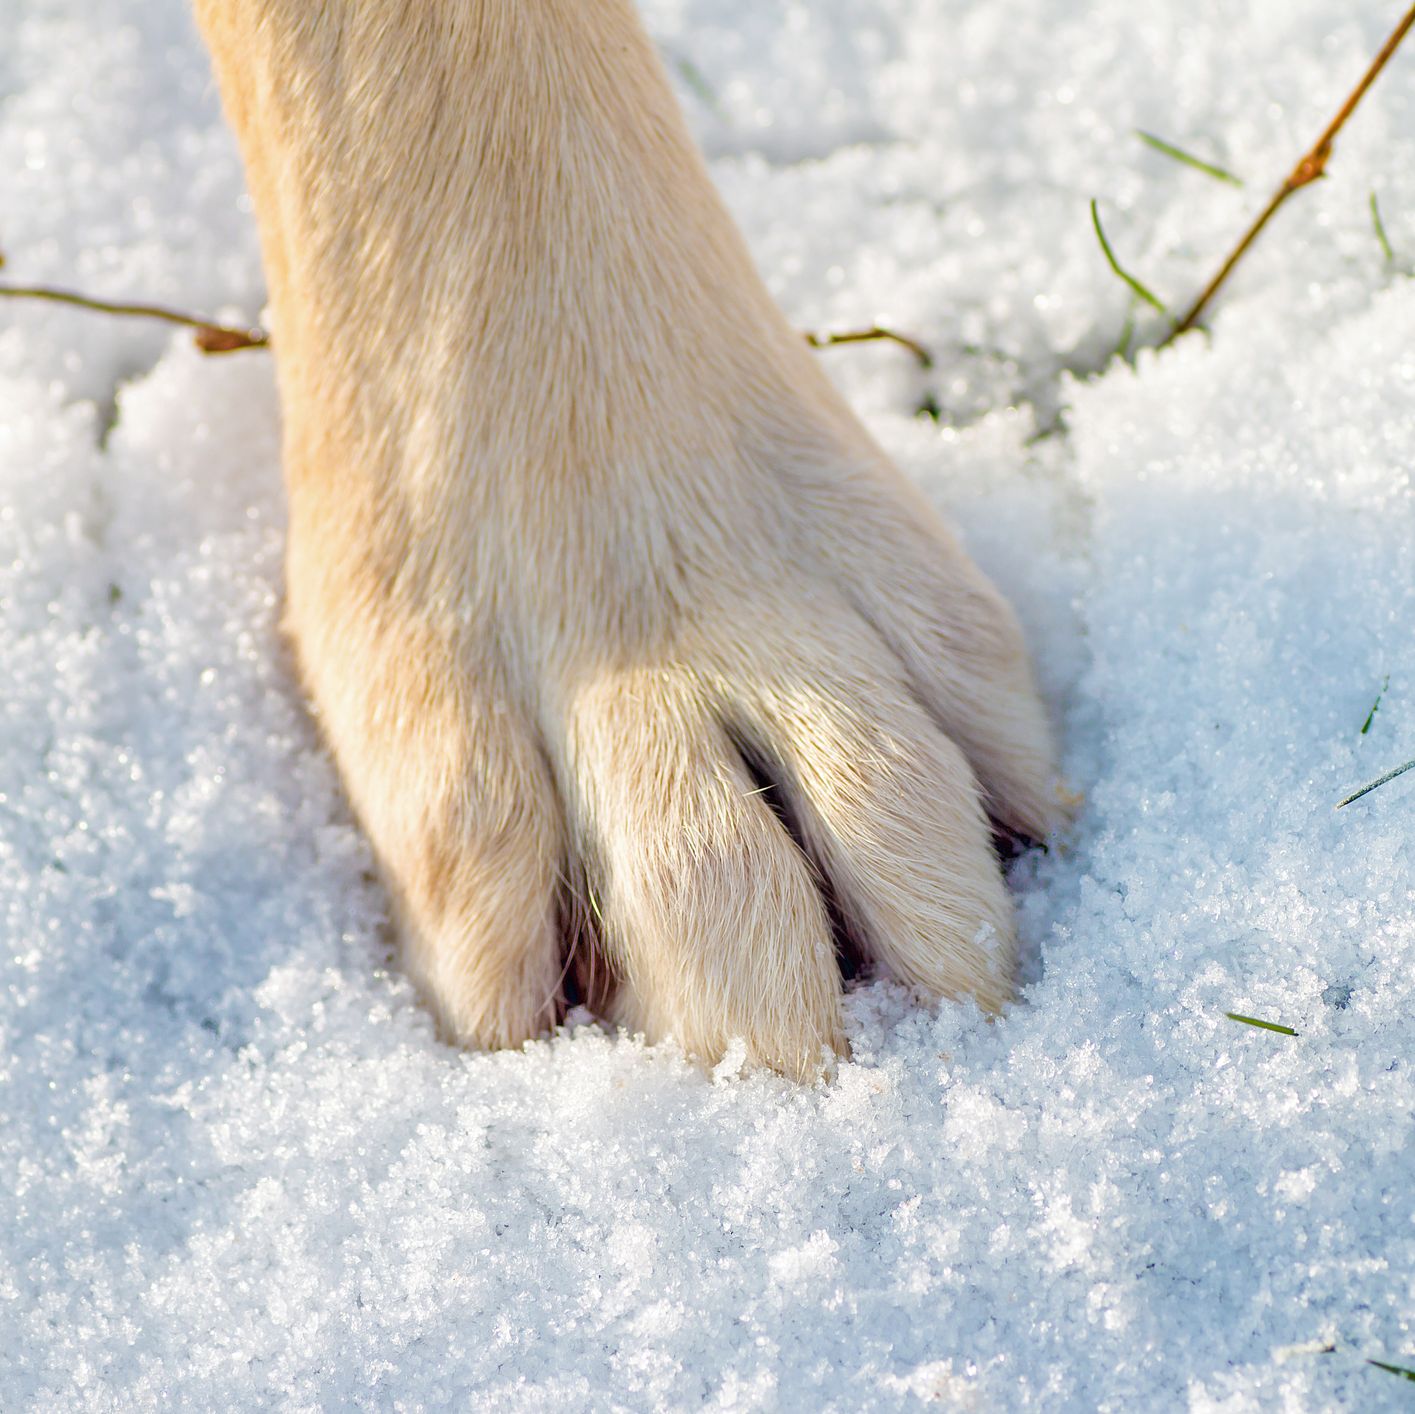 One dog's paw in snow